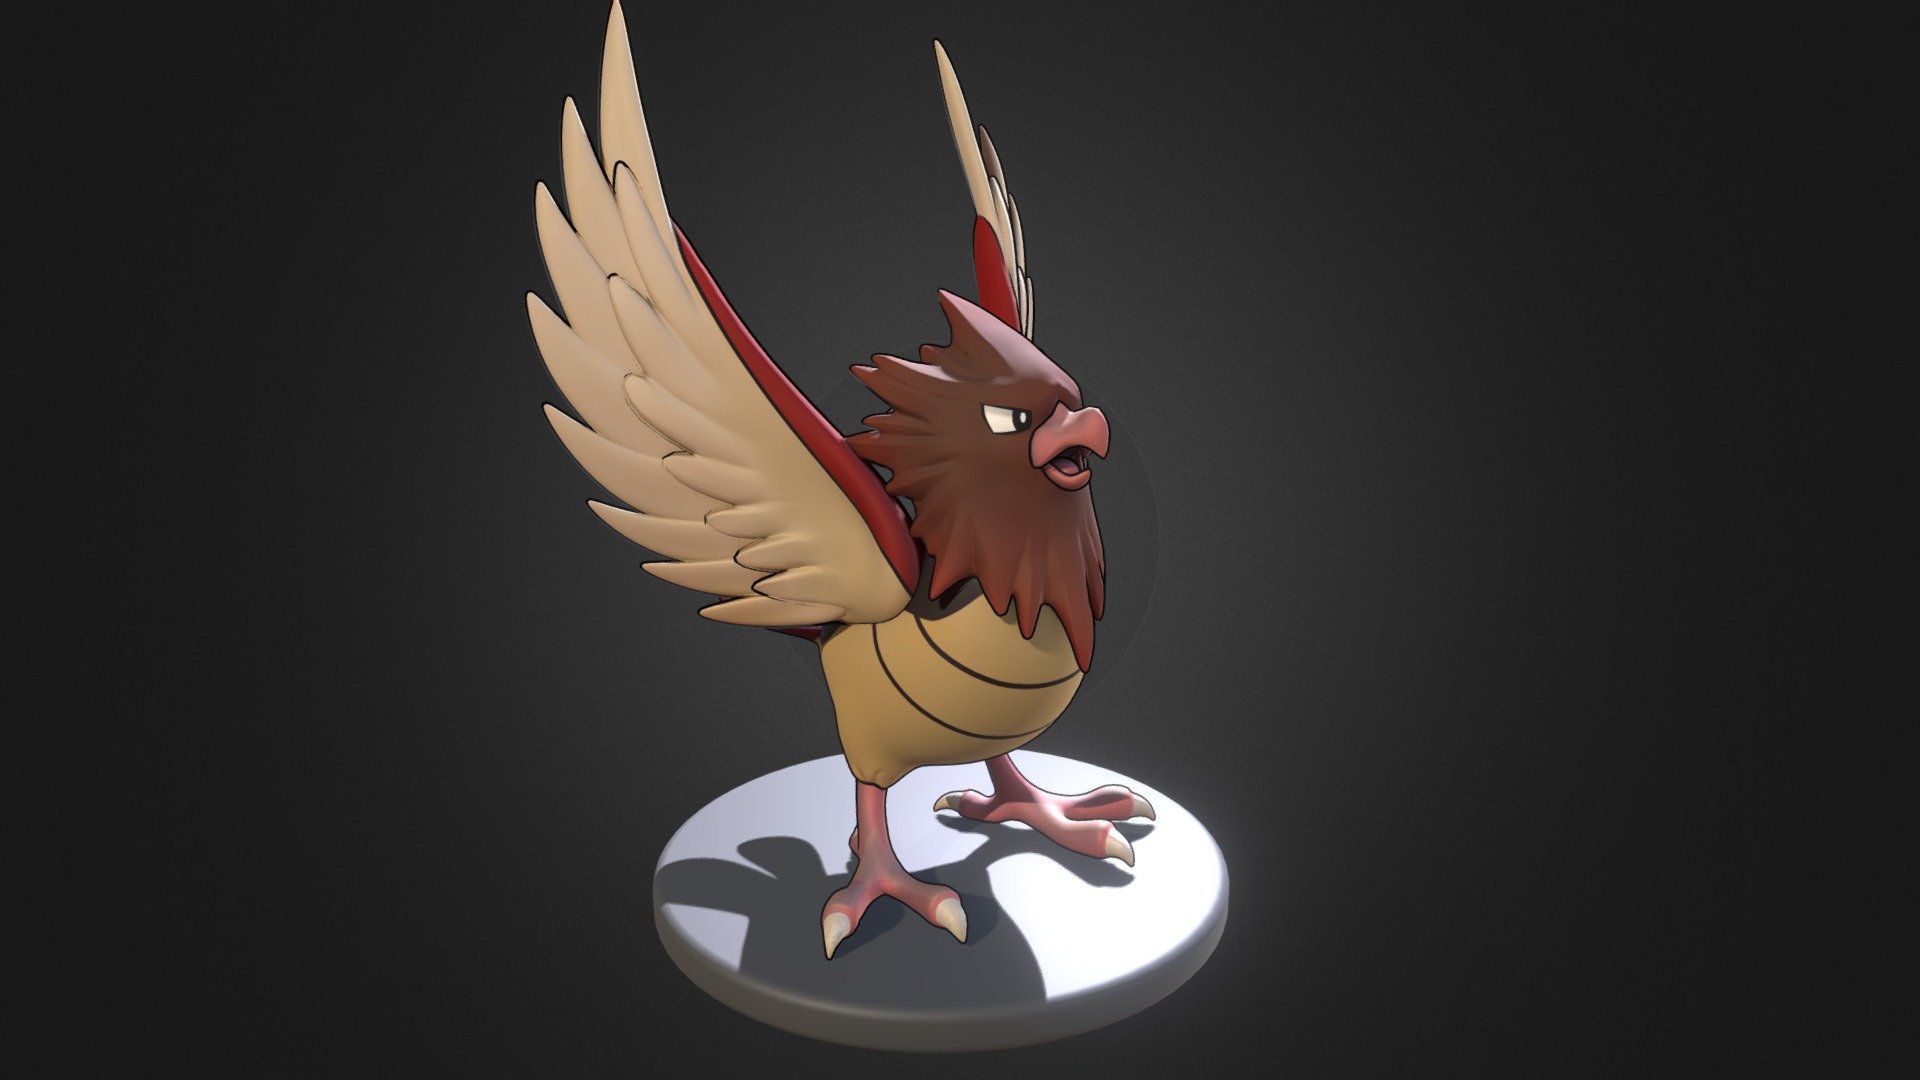 The angry one - Spearow pokemon - 3D model by 3dlogicus 3d model